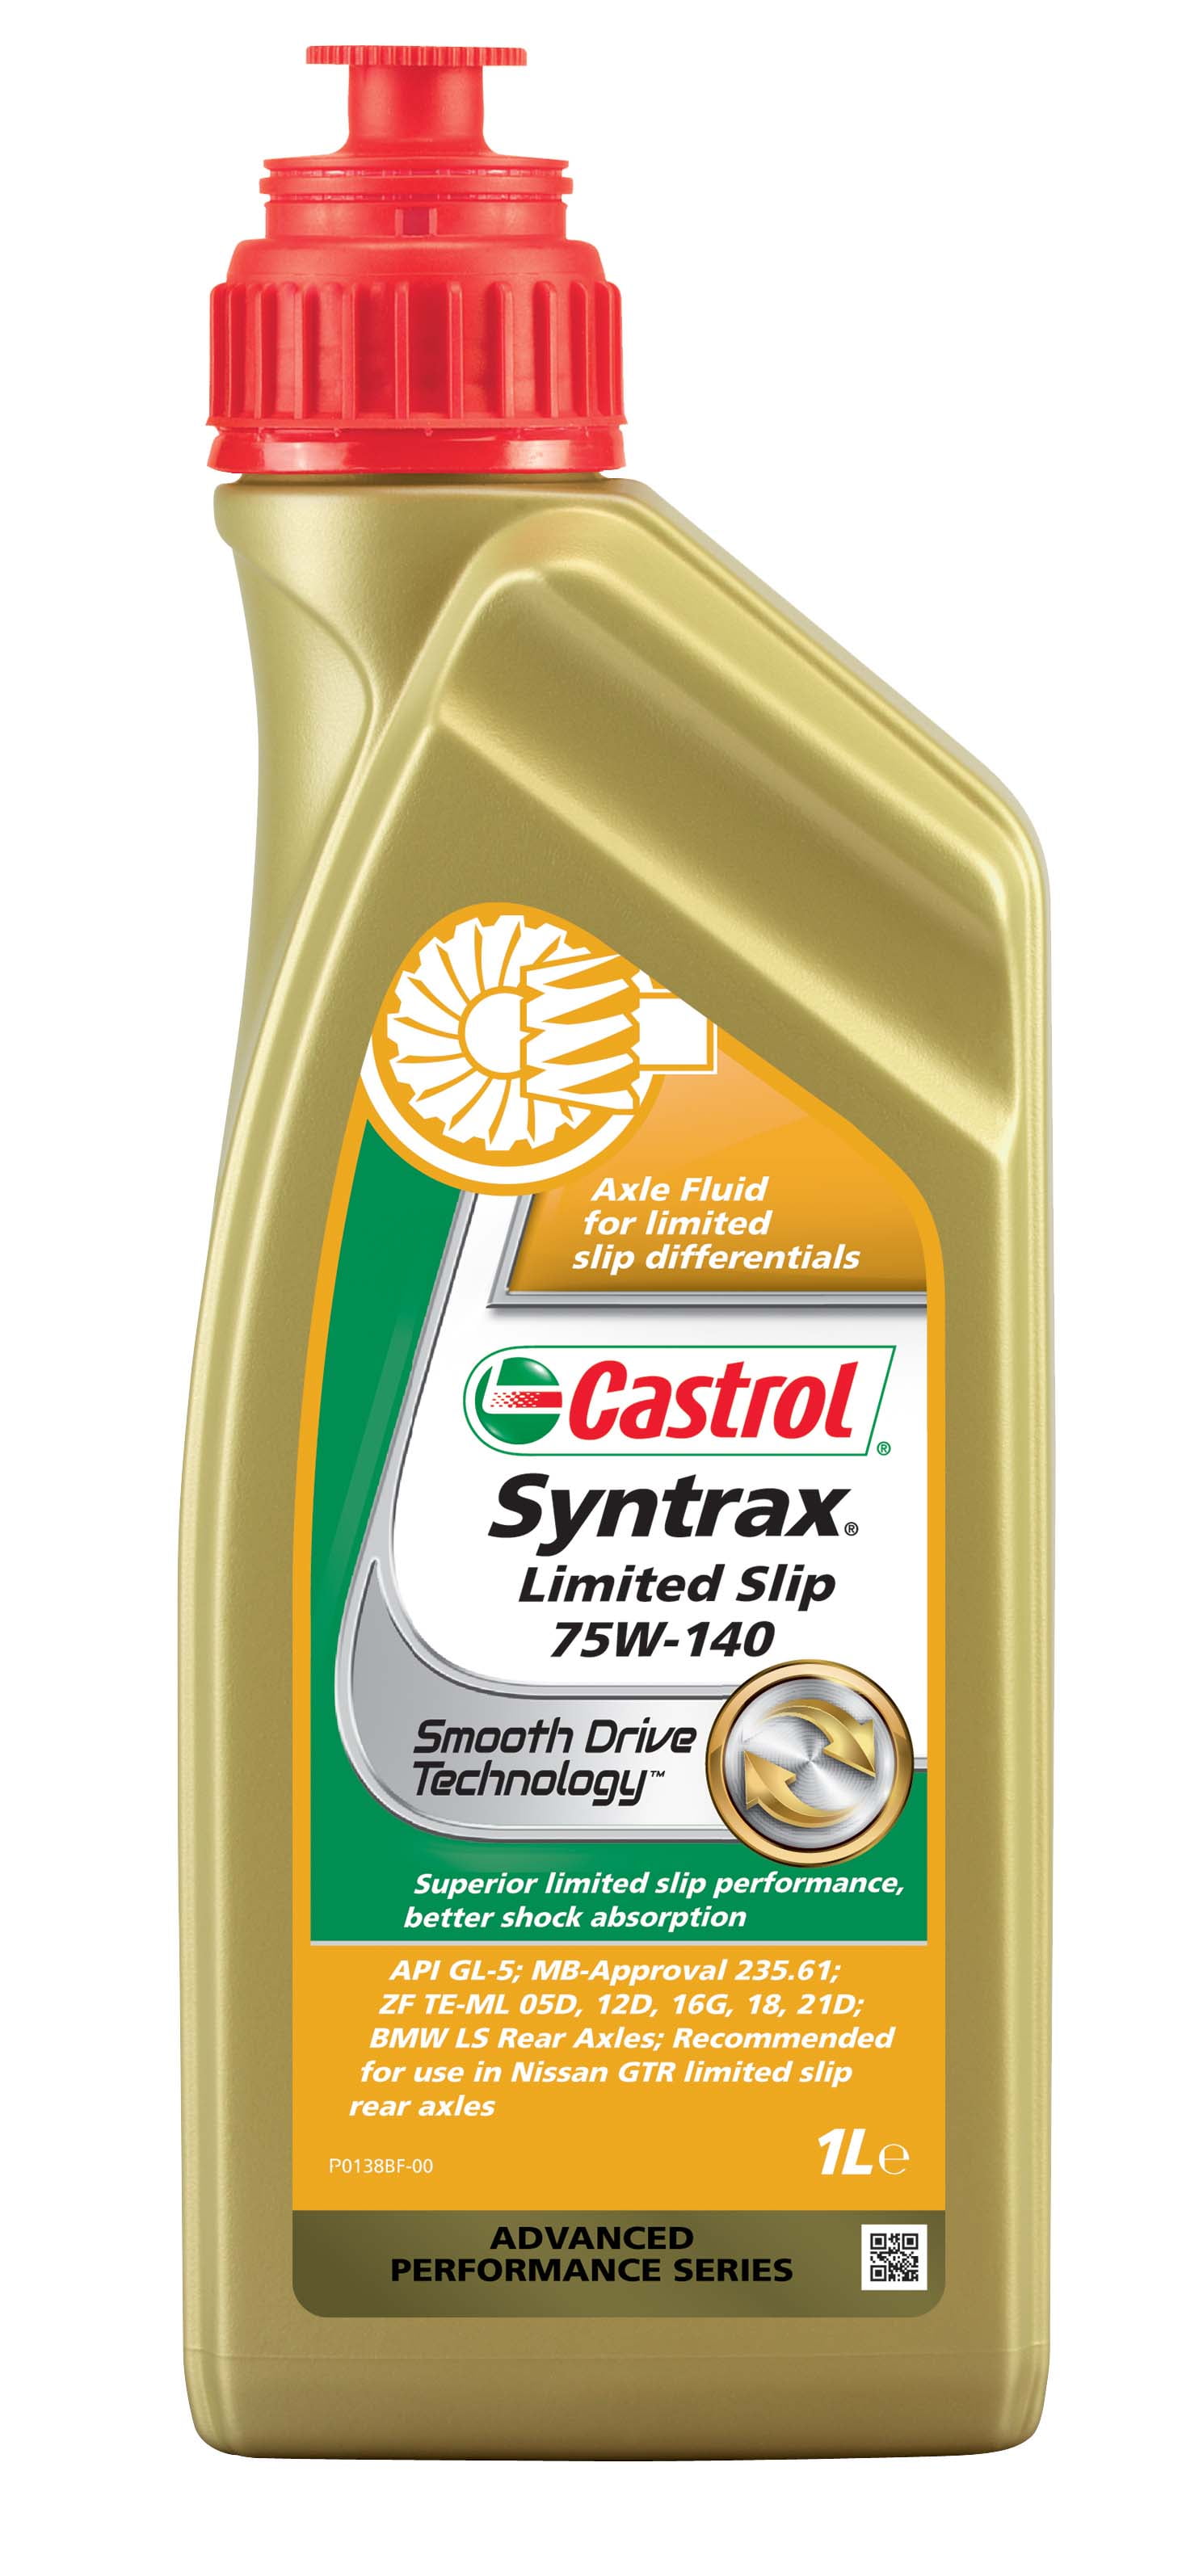 Castrol SYNTRAX Limited Slip 75W-140 Full Synthetic Gear Oil, 1 Liter - Walmart.com - Walmart.com How To Get Gear Oil Out Of Clothes